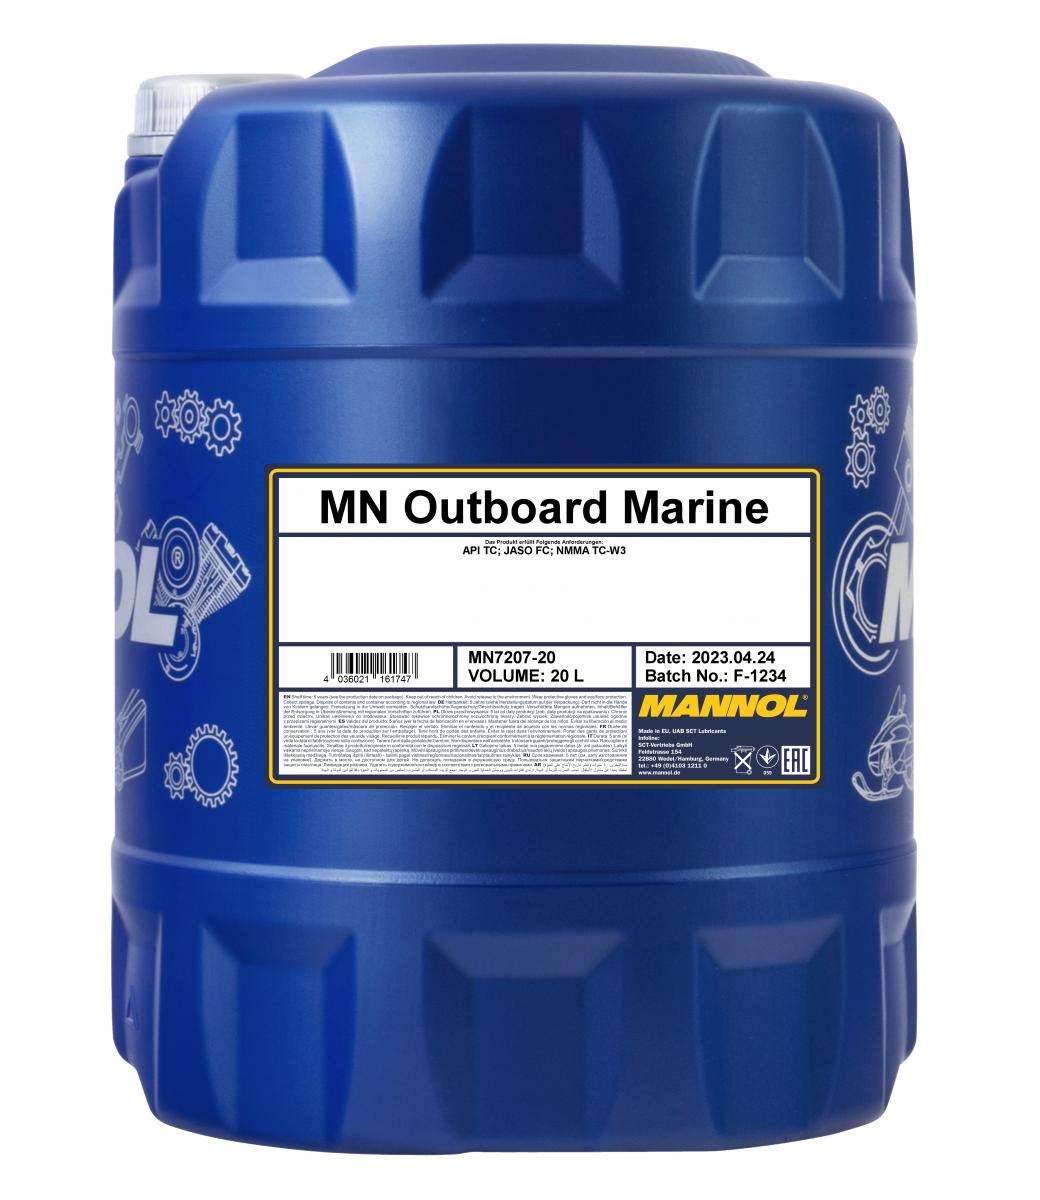 MN Outboard Marine